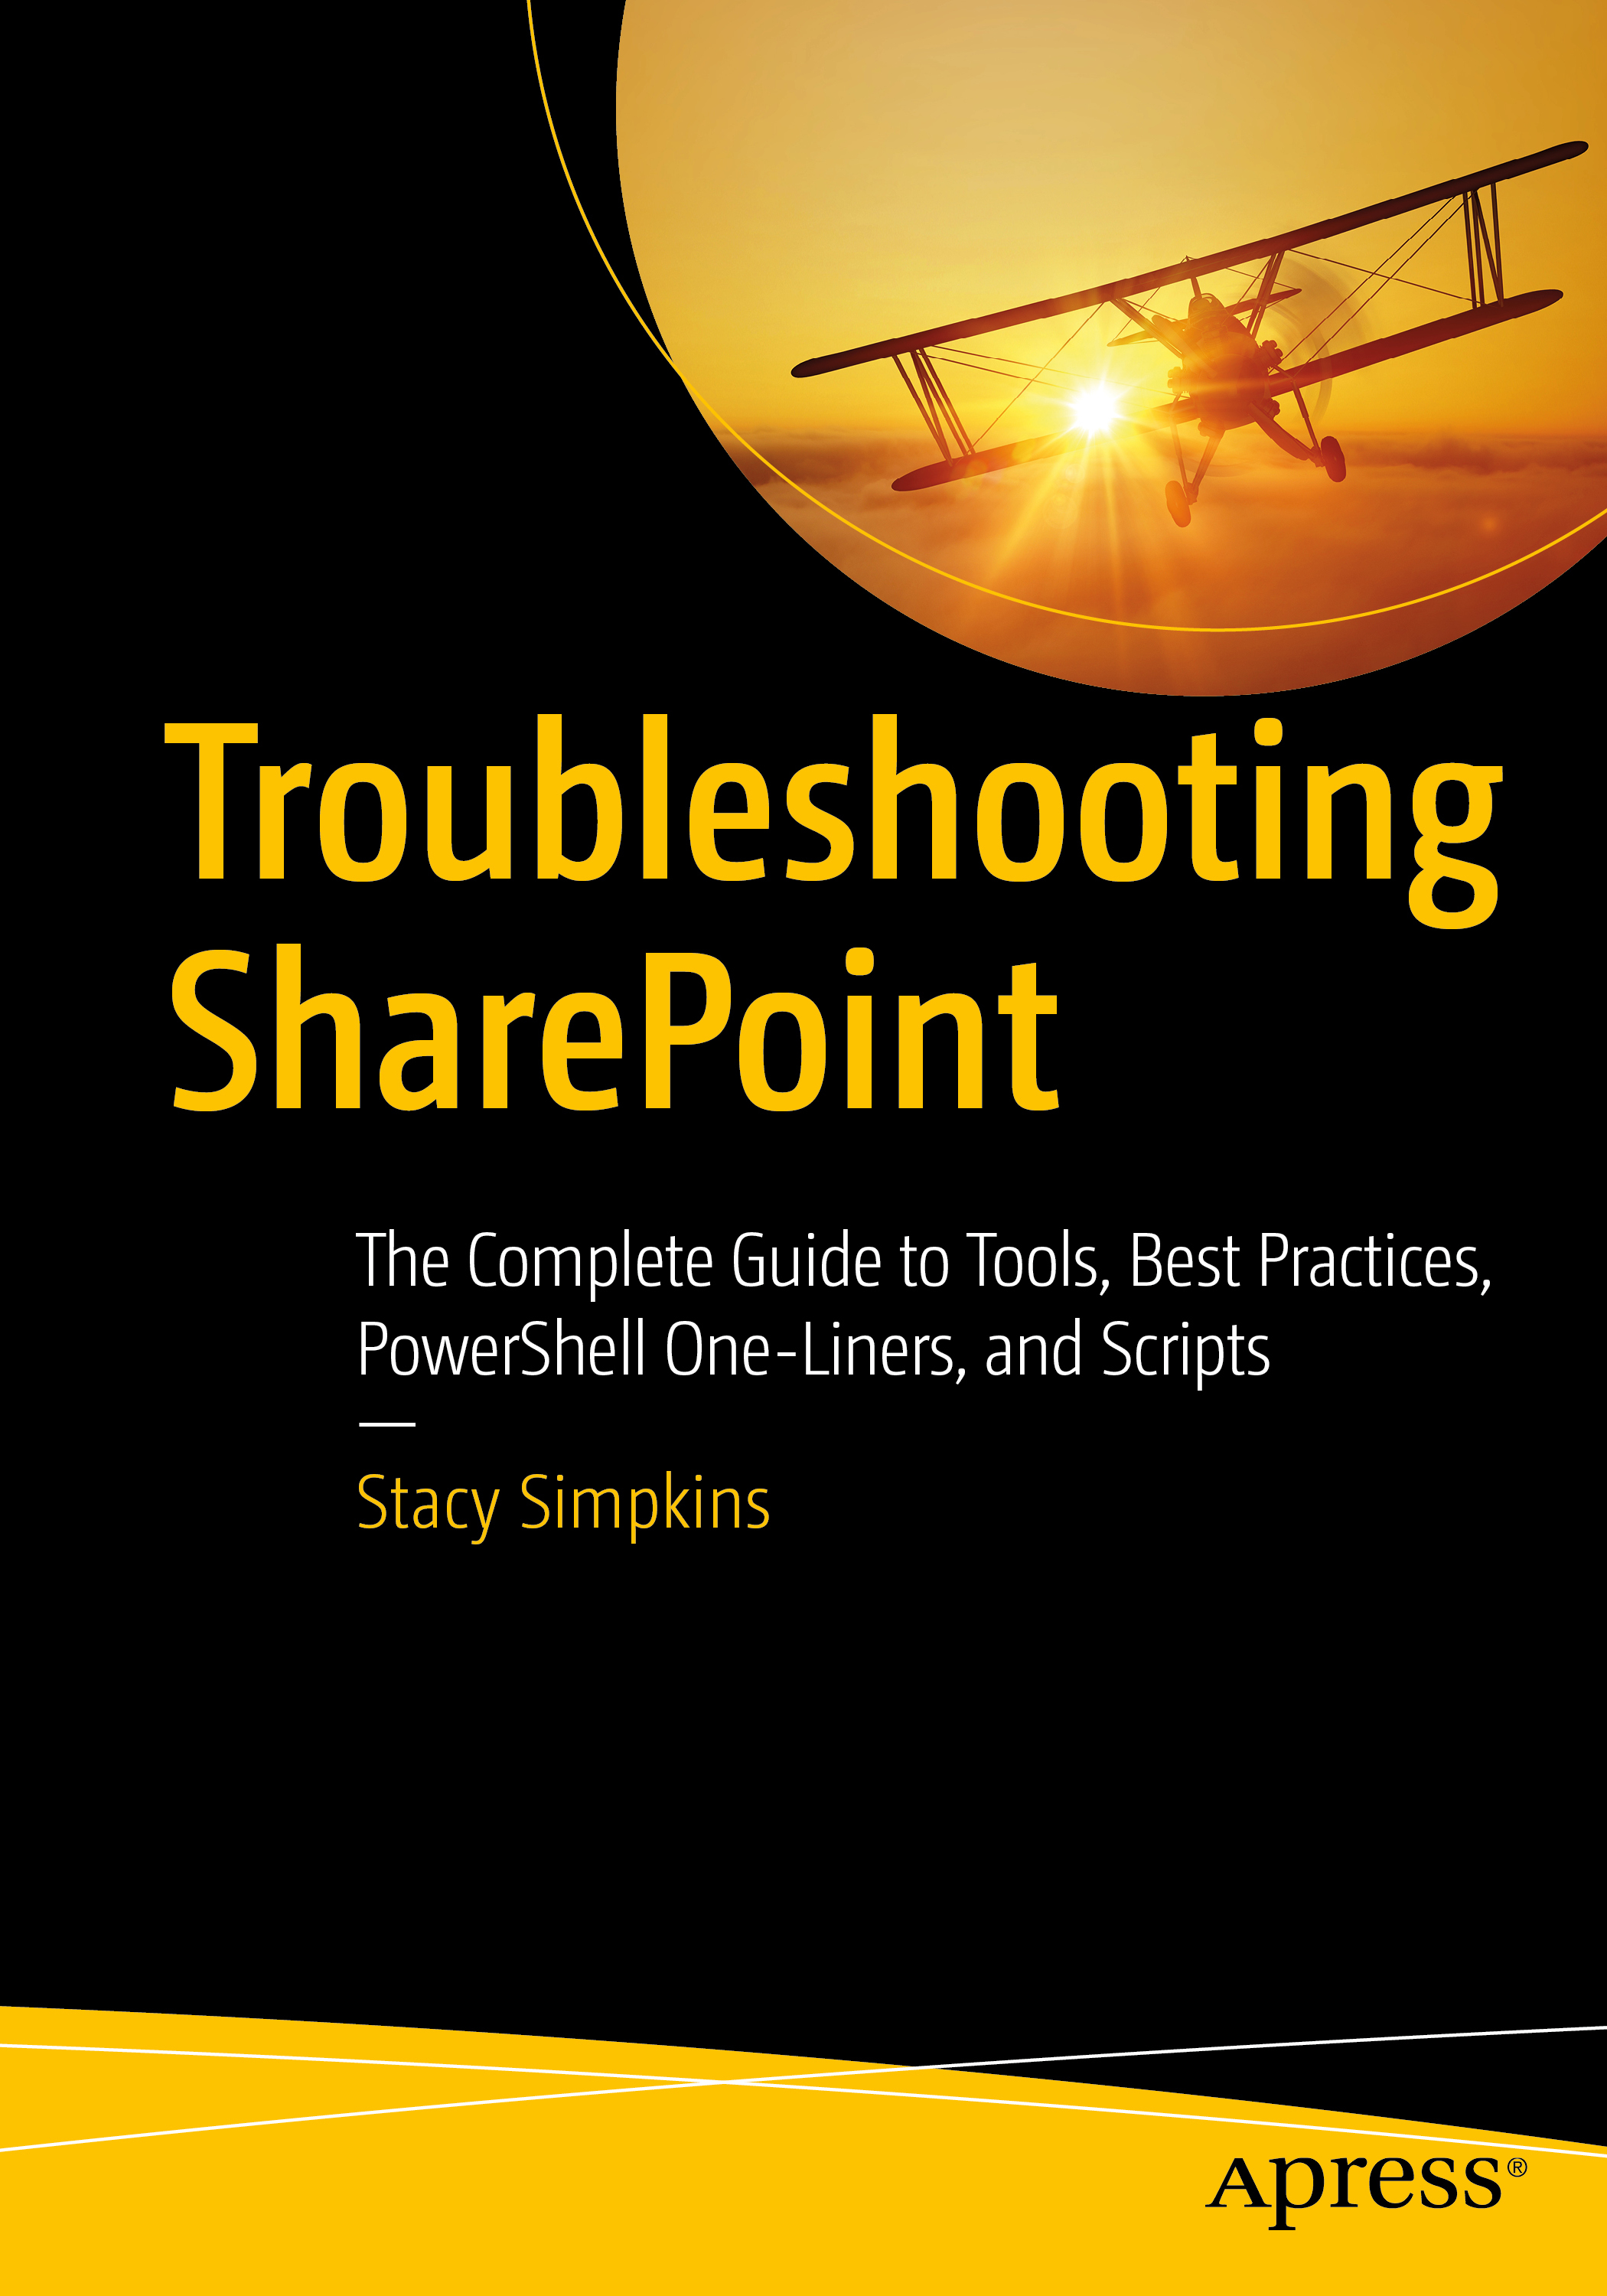 Introduction to Troubleshooting SharePoint